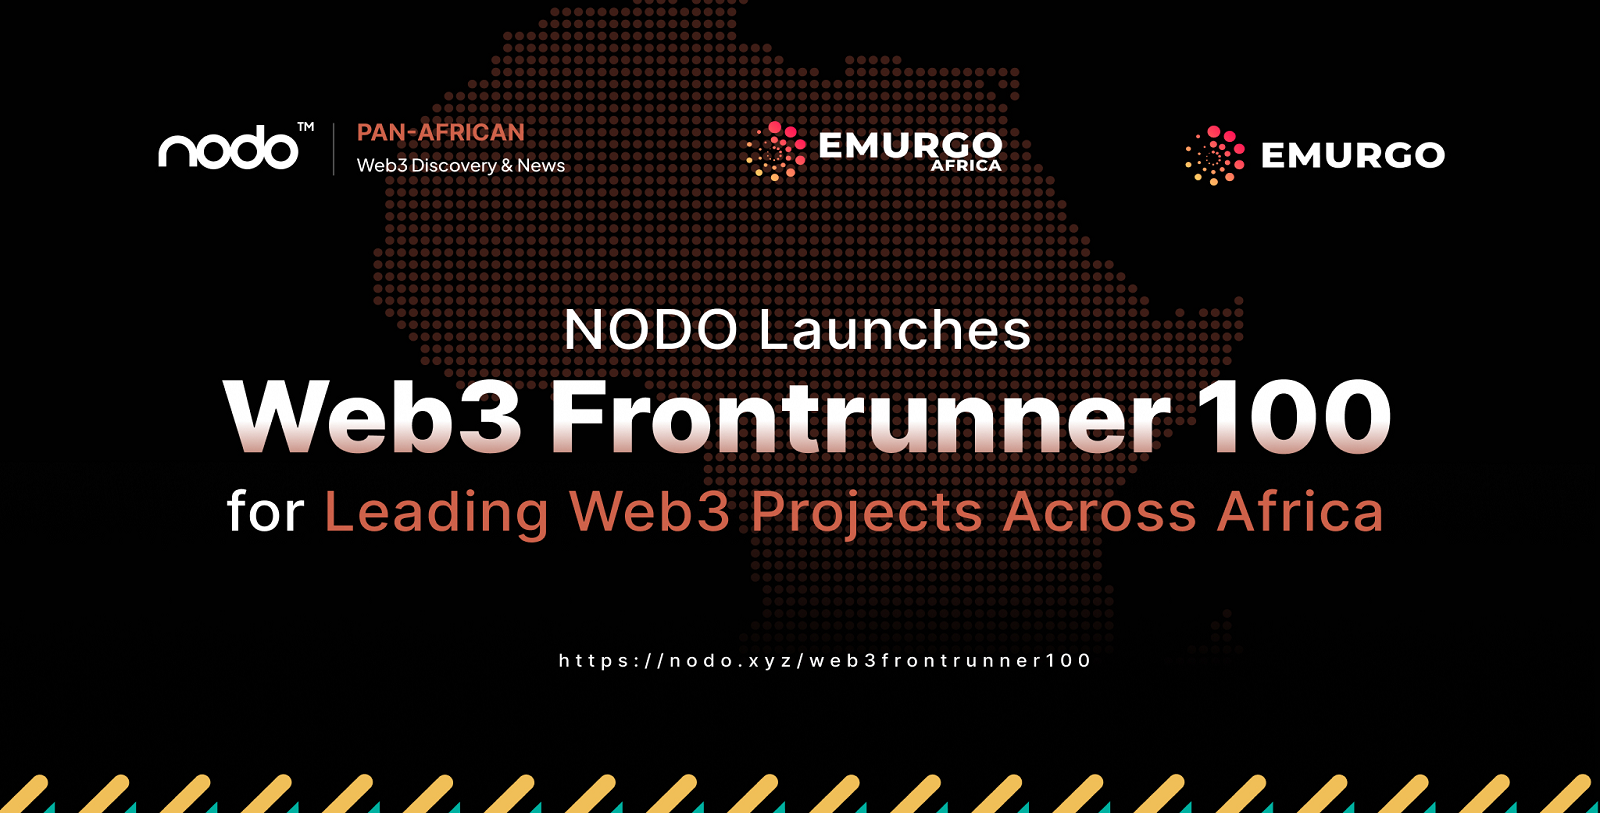 NODO Launches Web3 Frontrunner 100 for Leading Web3 Projects Across Africa